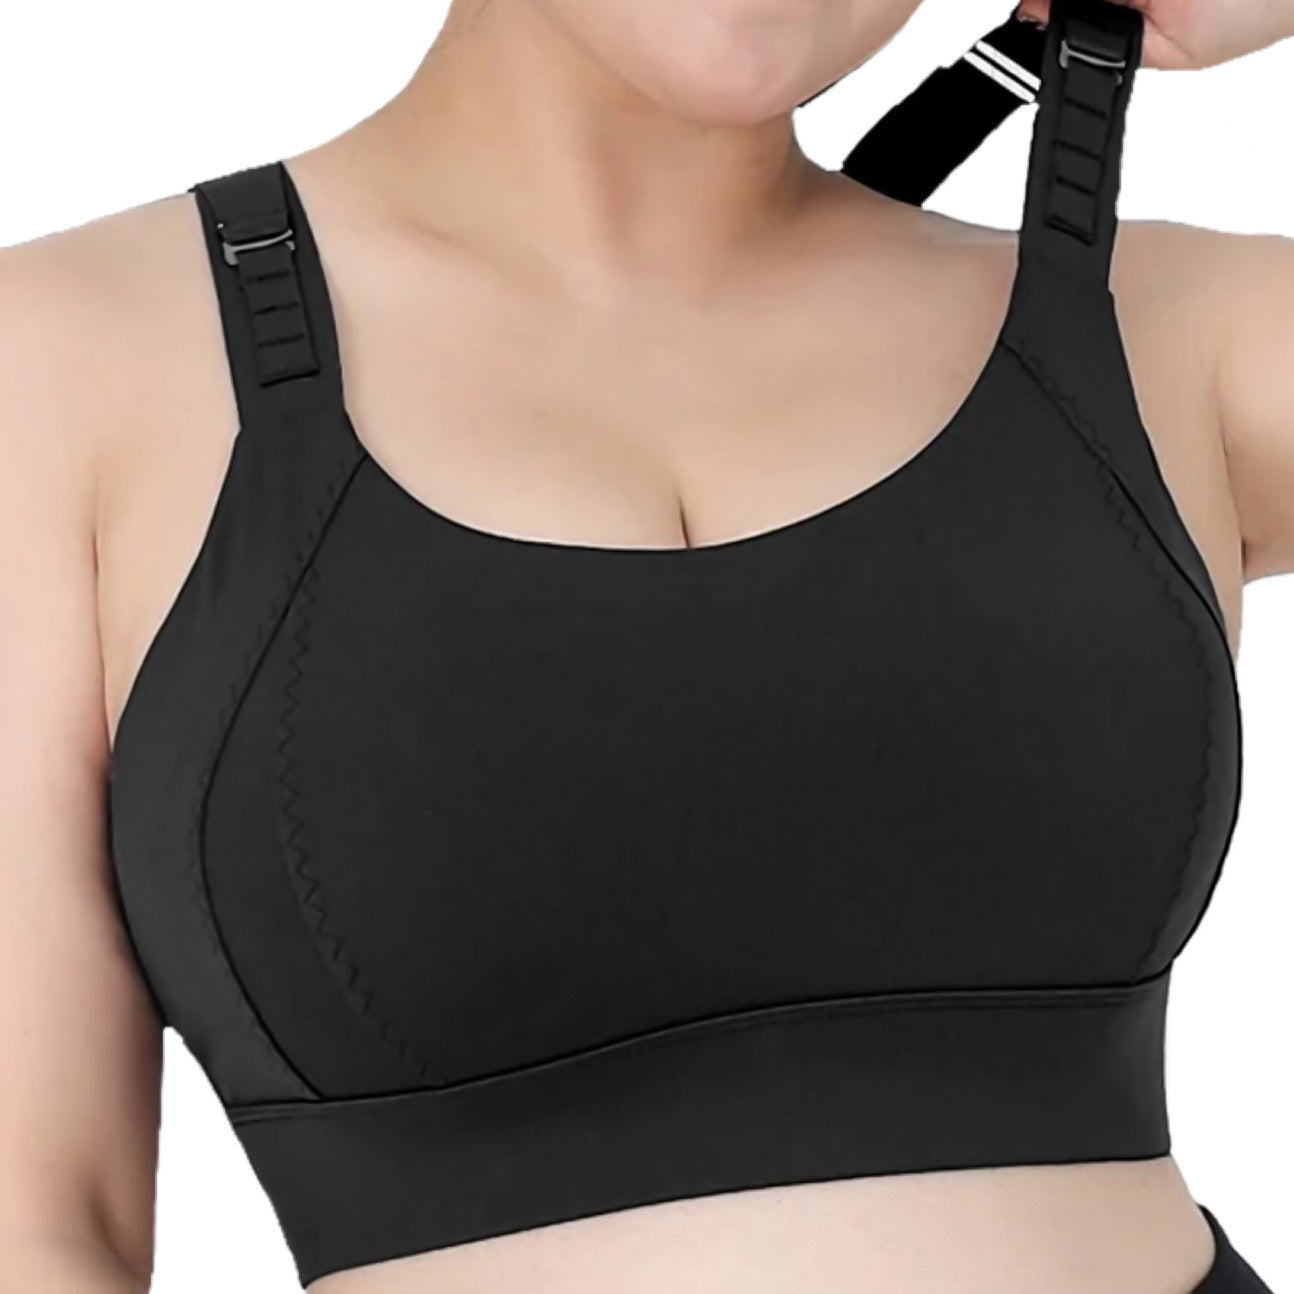 Big Bust Sports Bra, Best Support Bra For Horse Riding